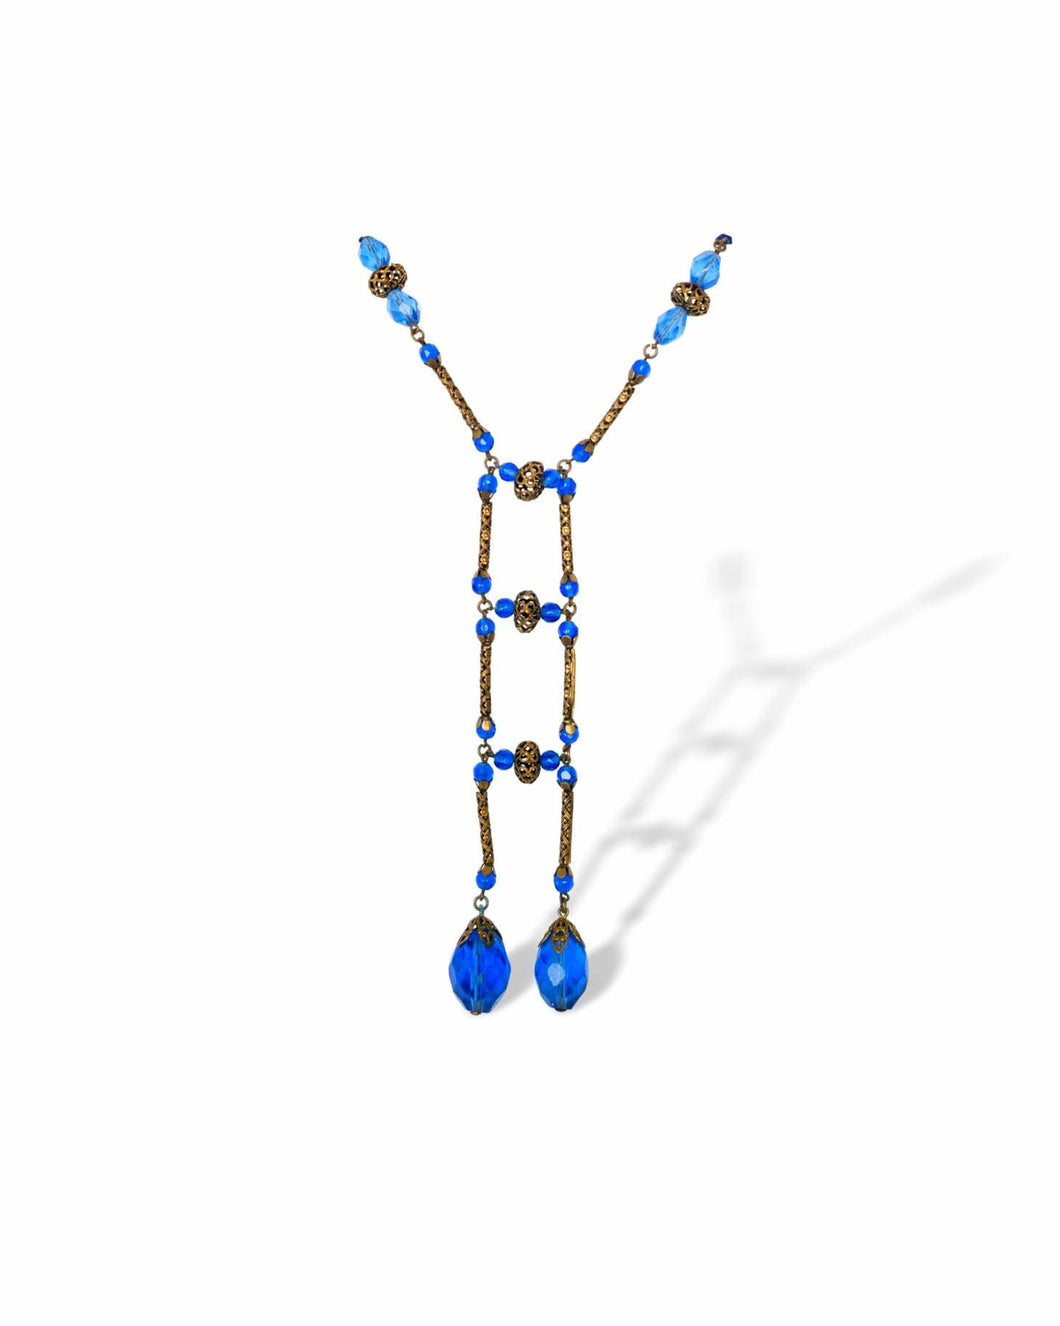 Rare art deco blue Czech glass and brass filigree faceted bead necklace, vintage